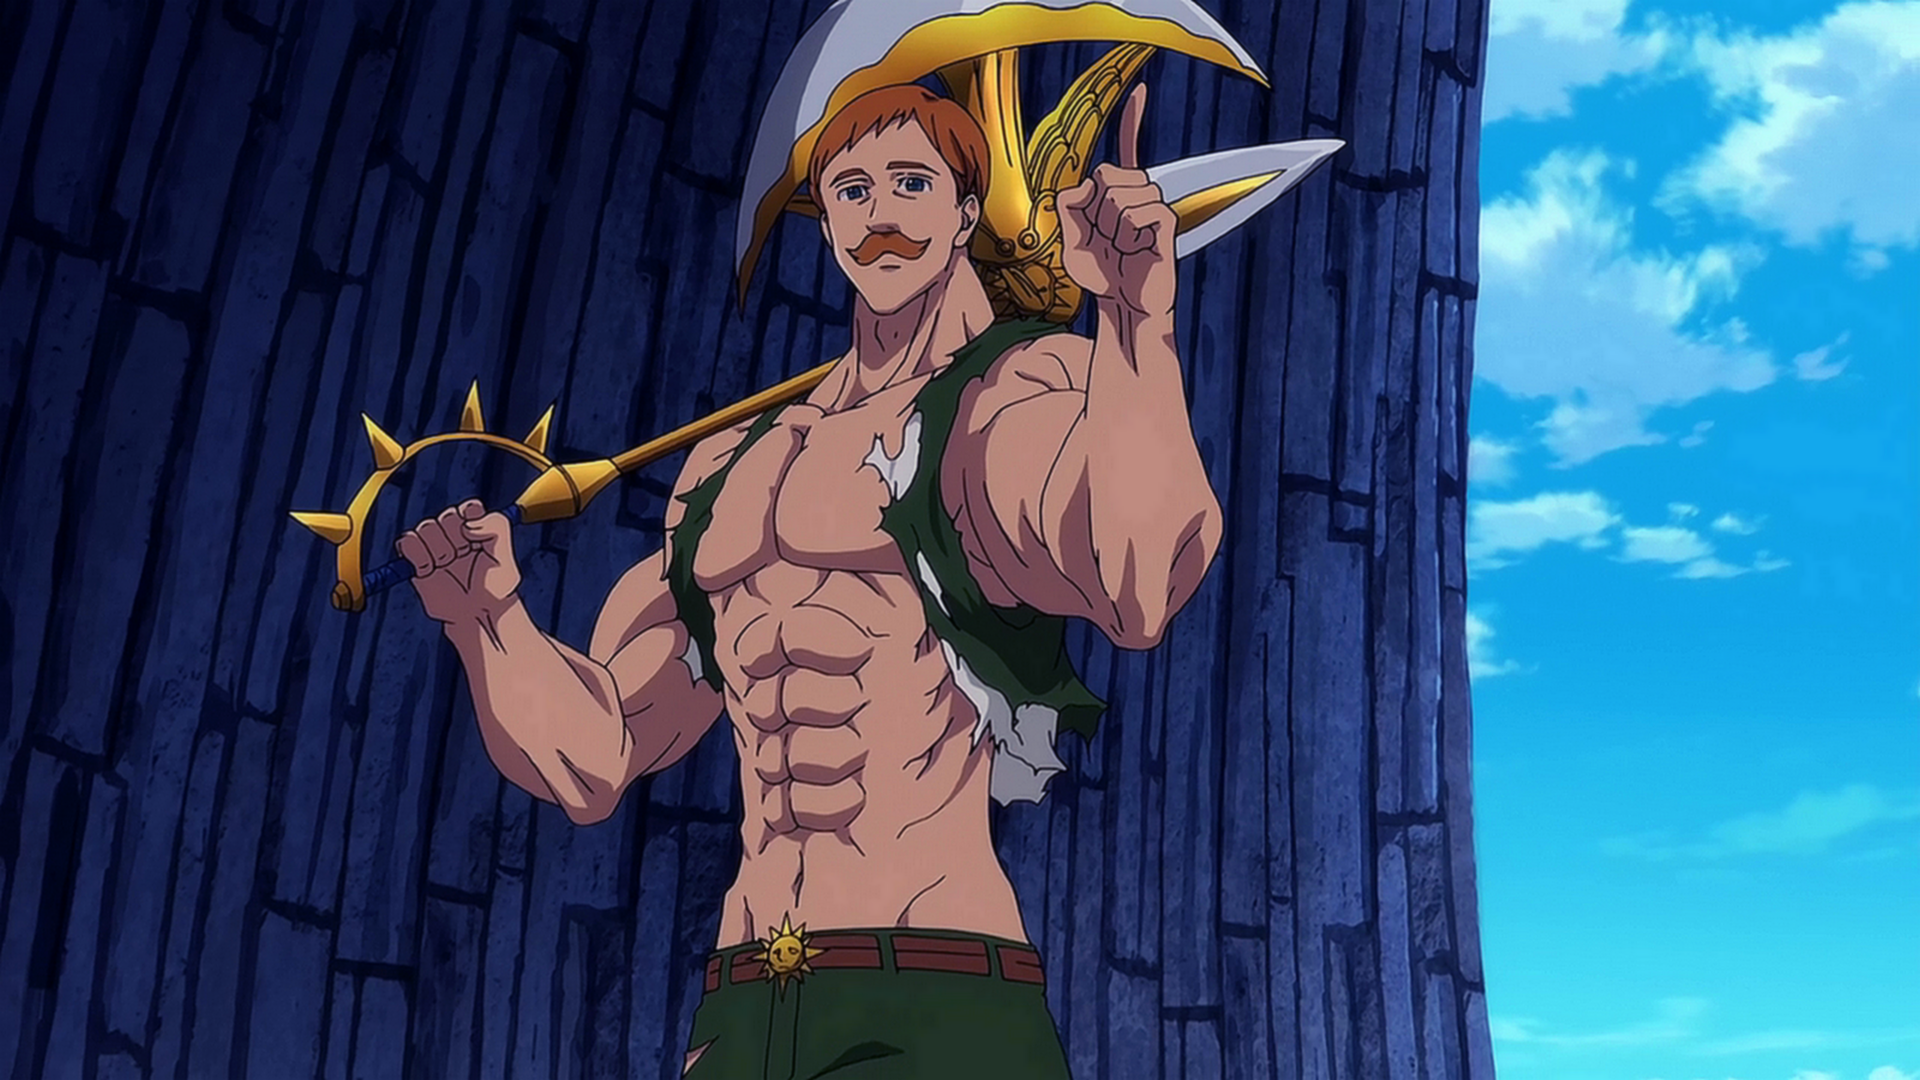 Lord Escanor HD Wallpaper | Background Image | 1920x1080 | ID:938084 - Wallpaper Abyss